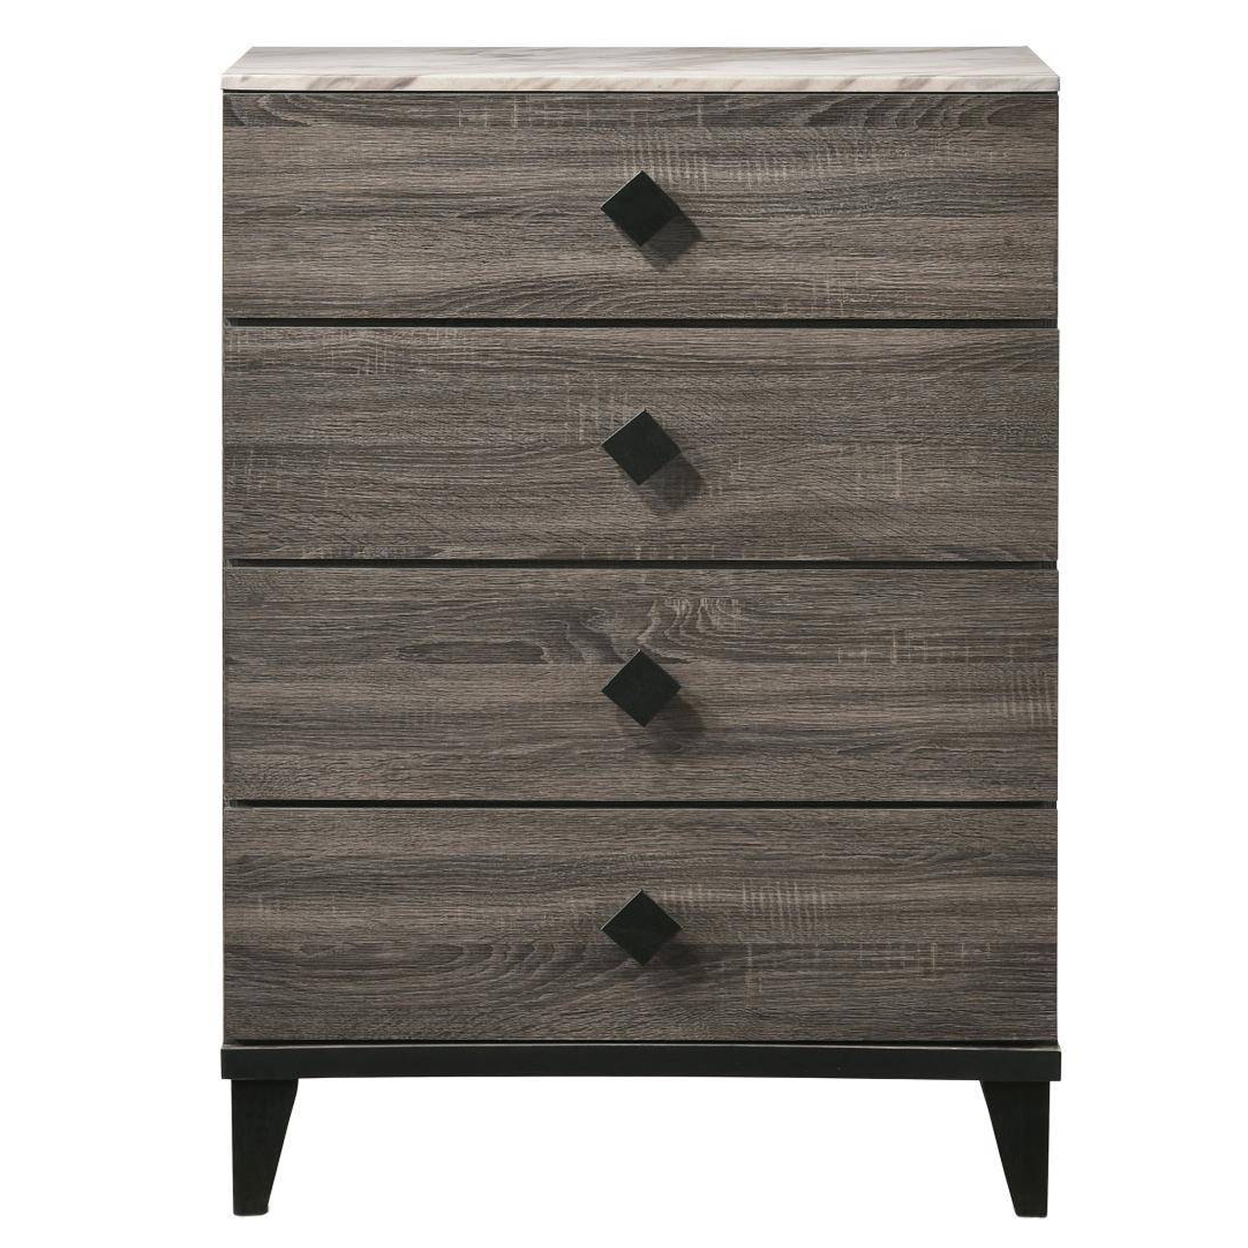 4 Drawer Wooden Chest With Grains And Angled Legs, Gray- Saltoro Sherpi